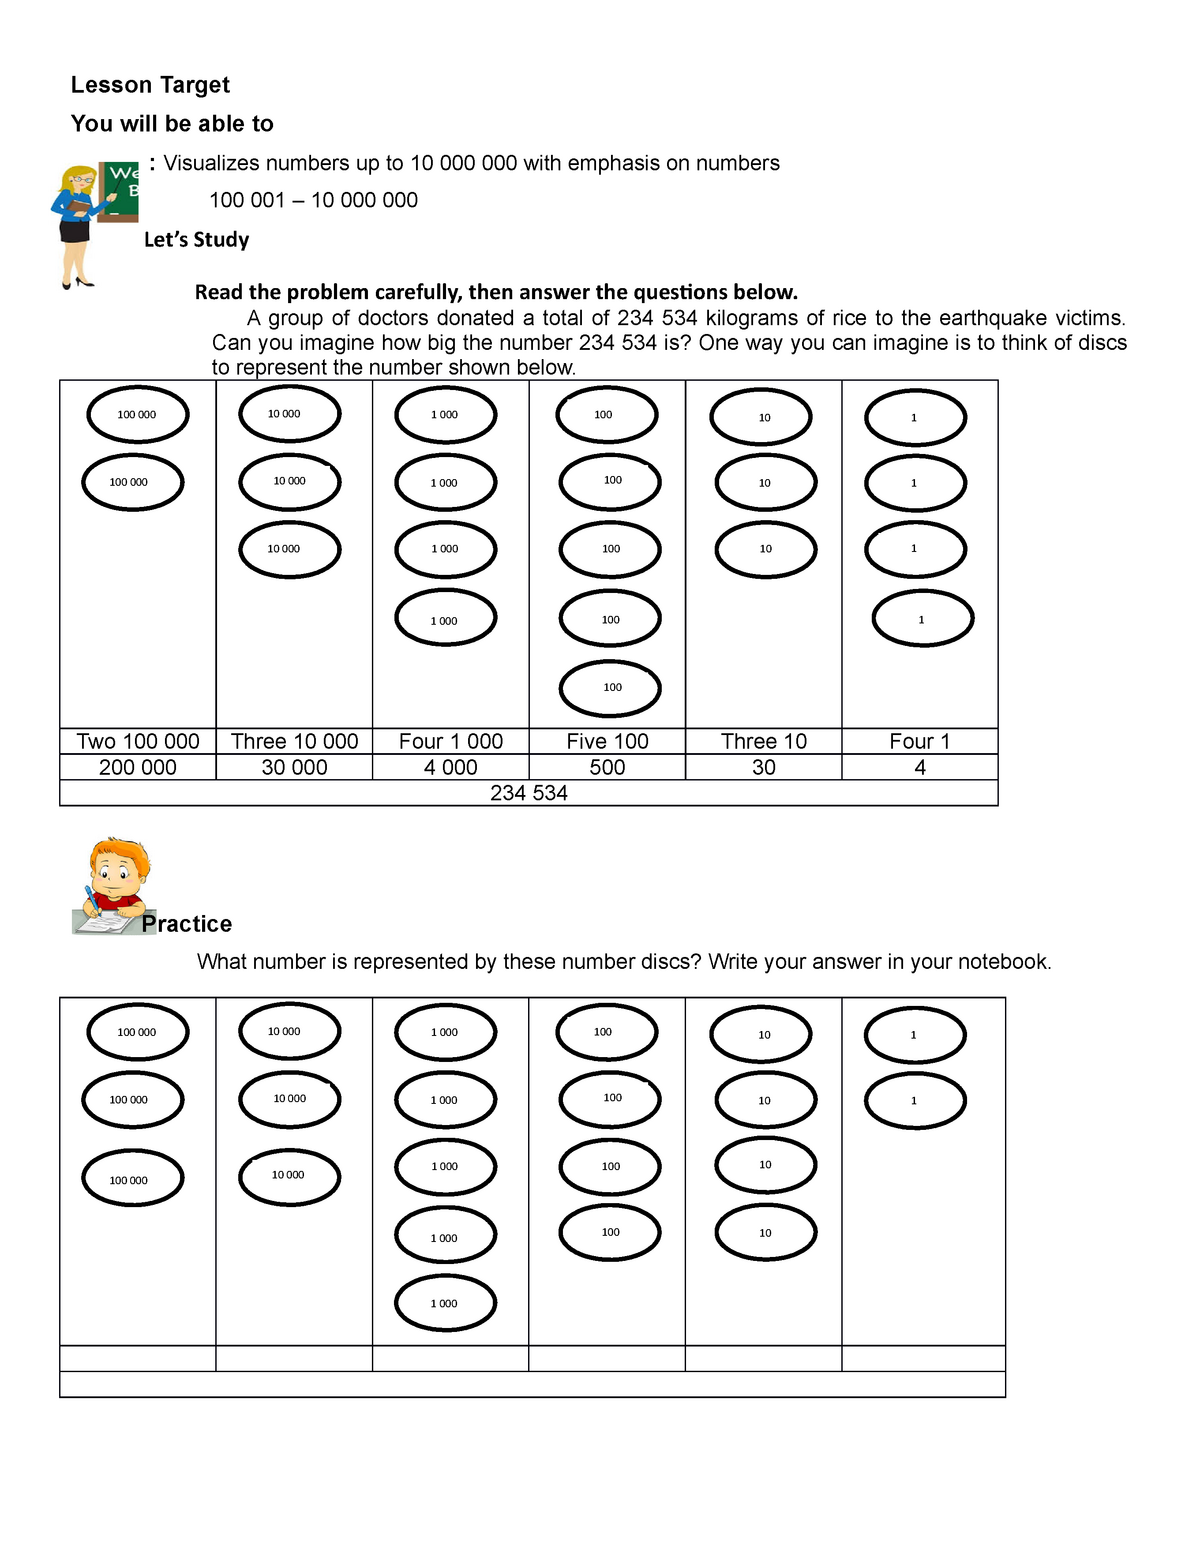 worksheet-1-teacher-cora-lesson-target-you-will-be-able-to-let-s